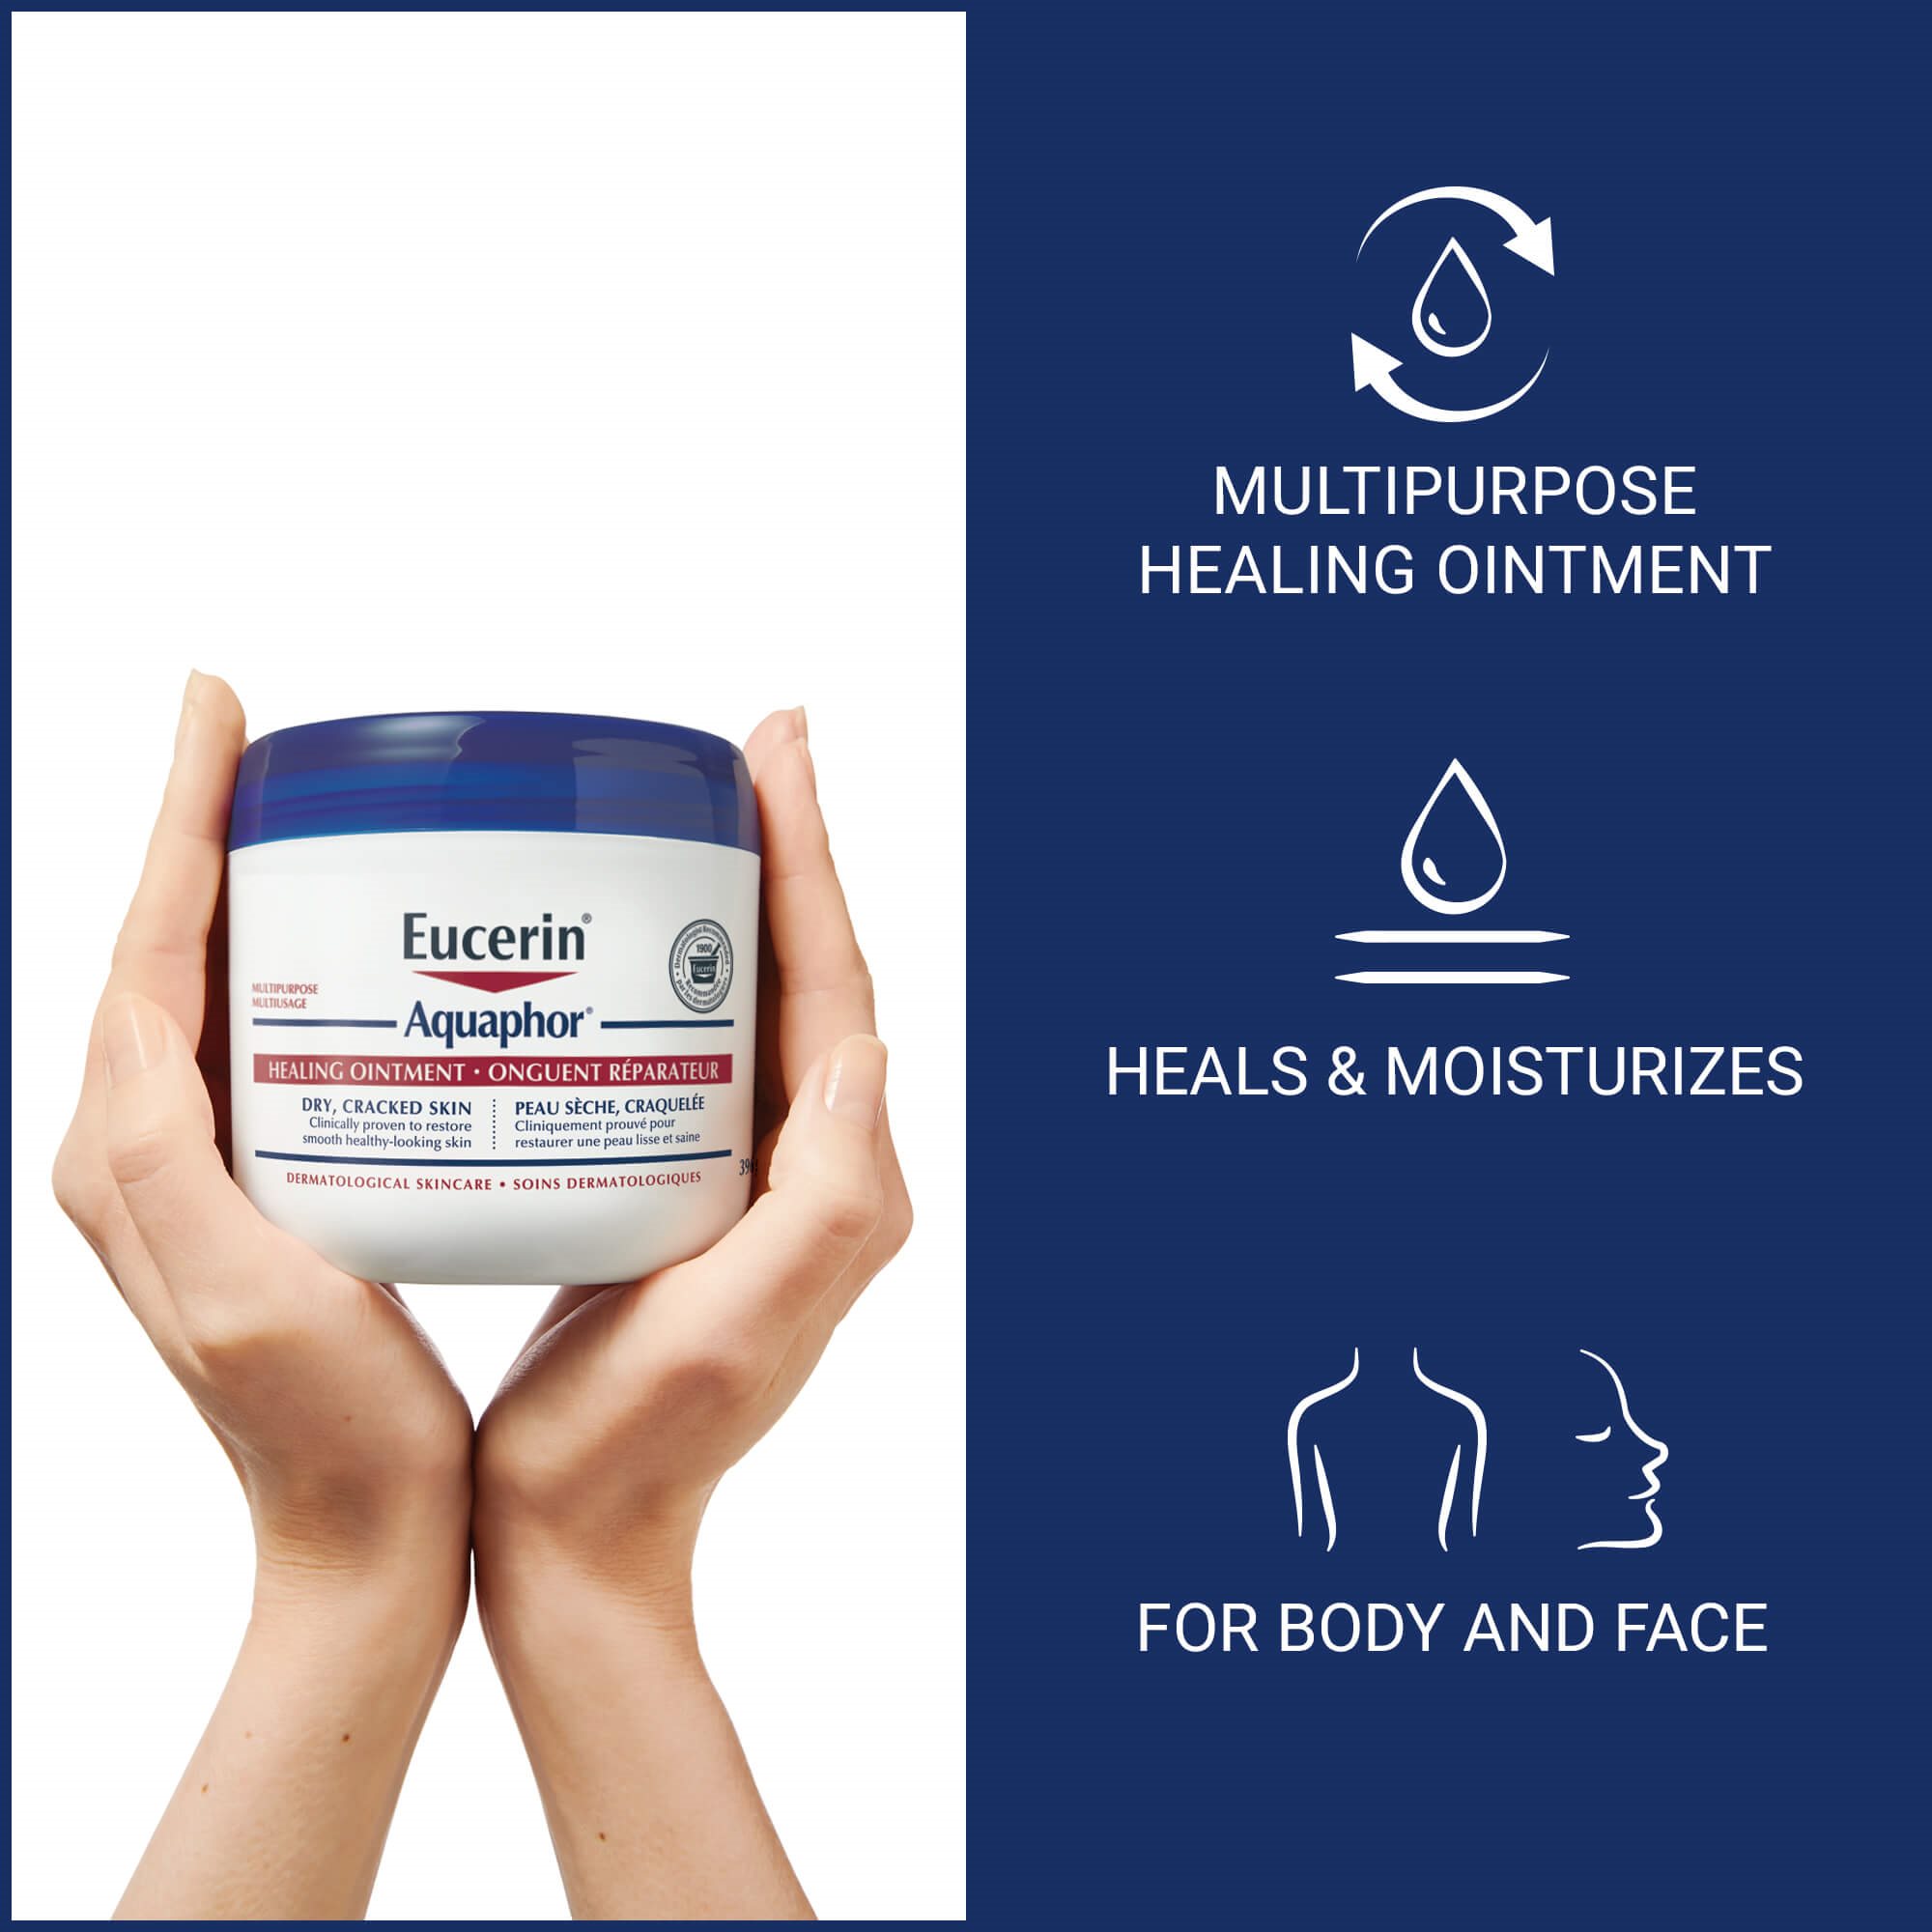 Closeup of hands holding a 396g tub of Eucerin Aquaphor, with product features, benefits, and uses listed on the side